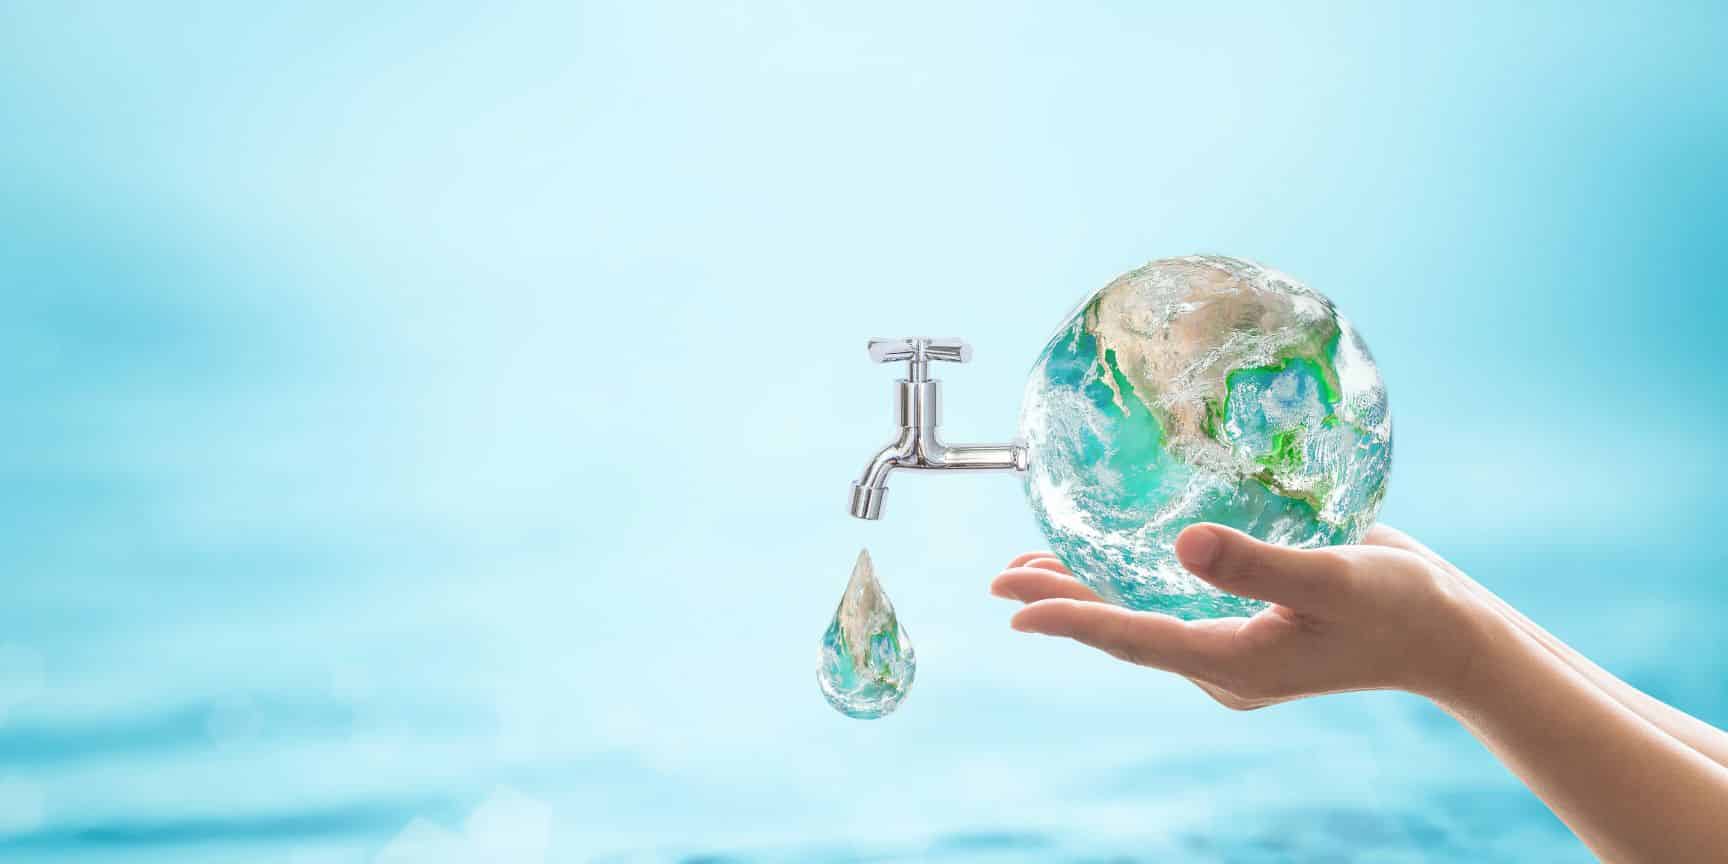 Hands holding small globe of water